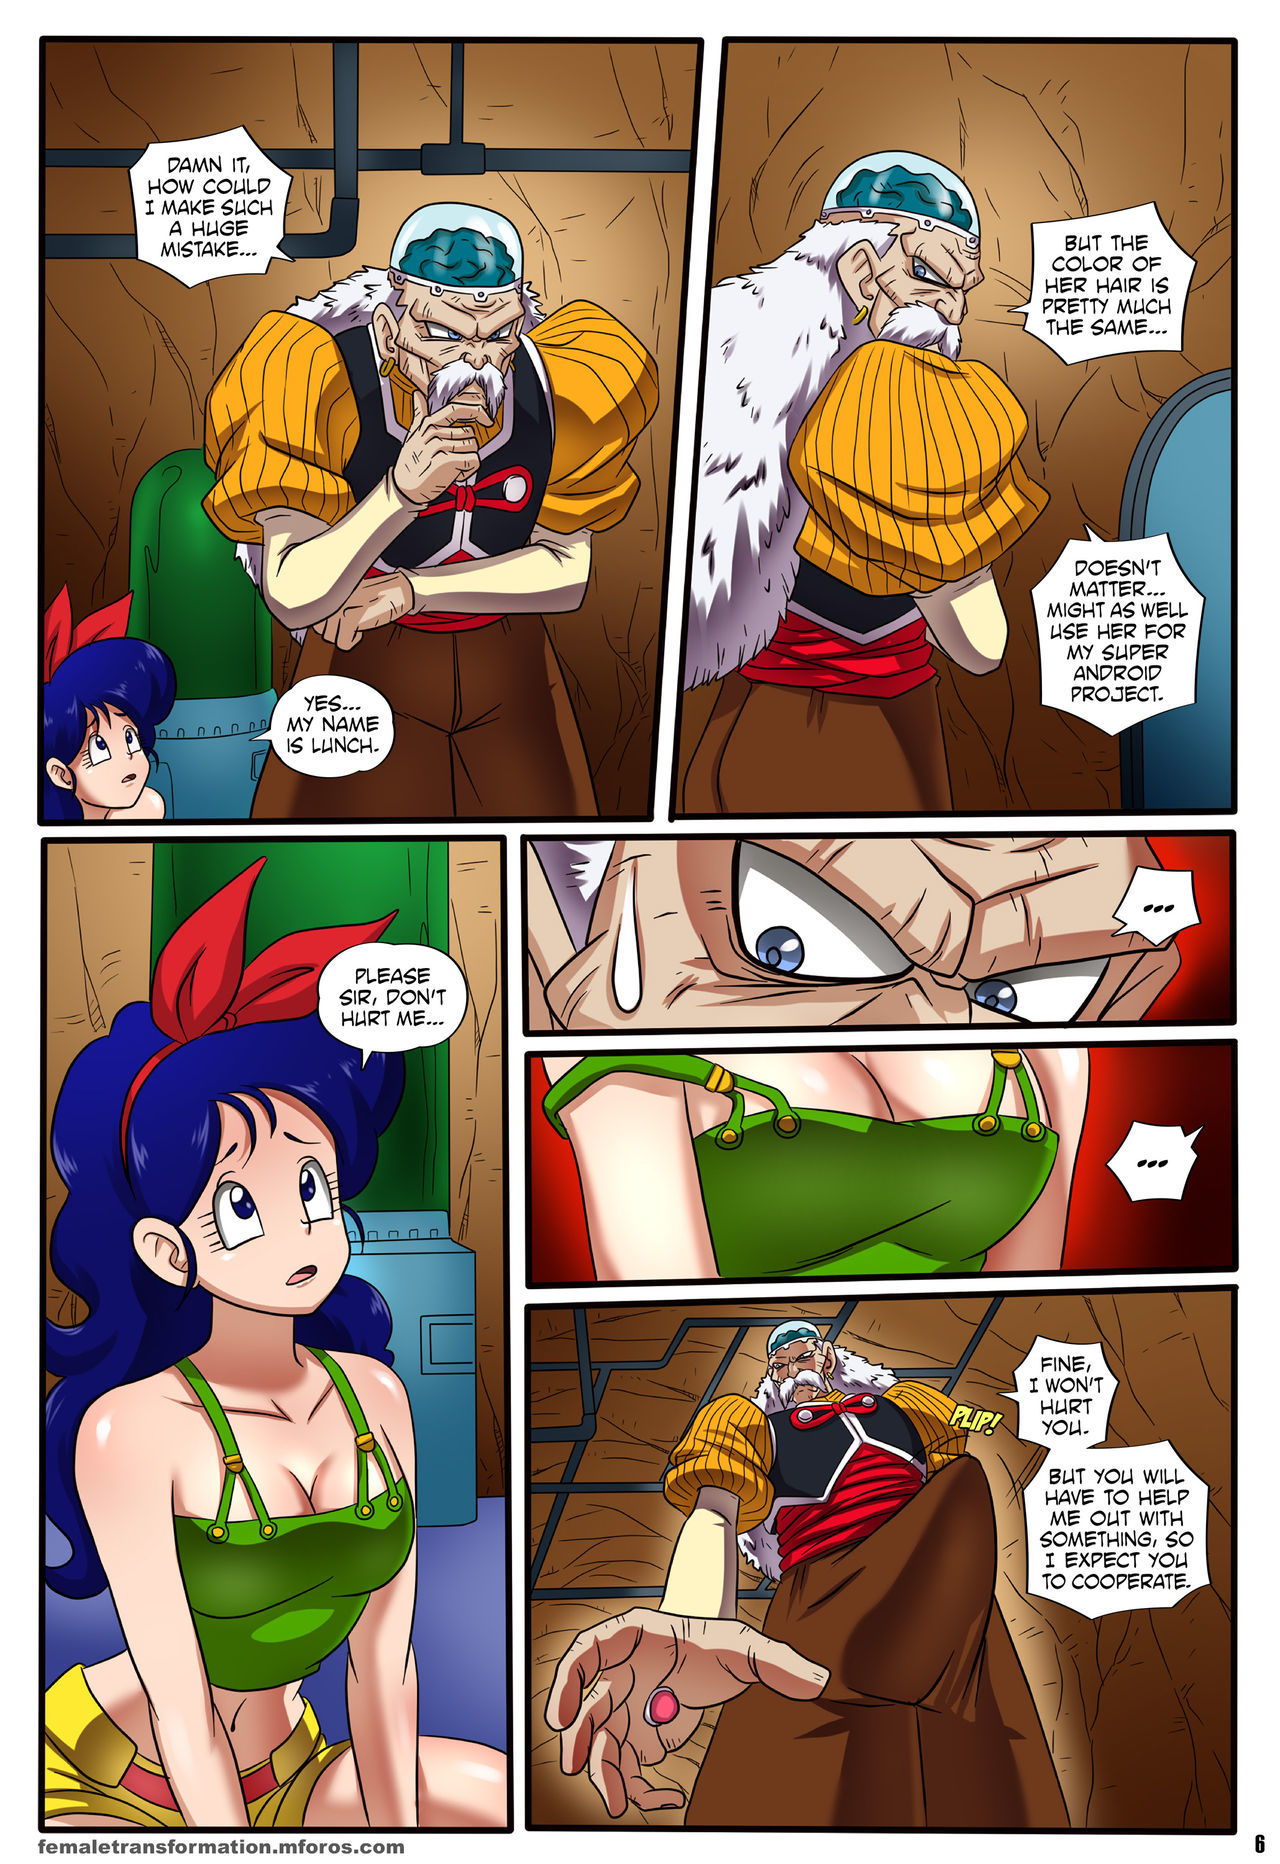 Expansive Sting 3 Dragon Ball Z by Locofuria & Voltesfibz page 8